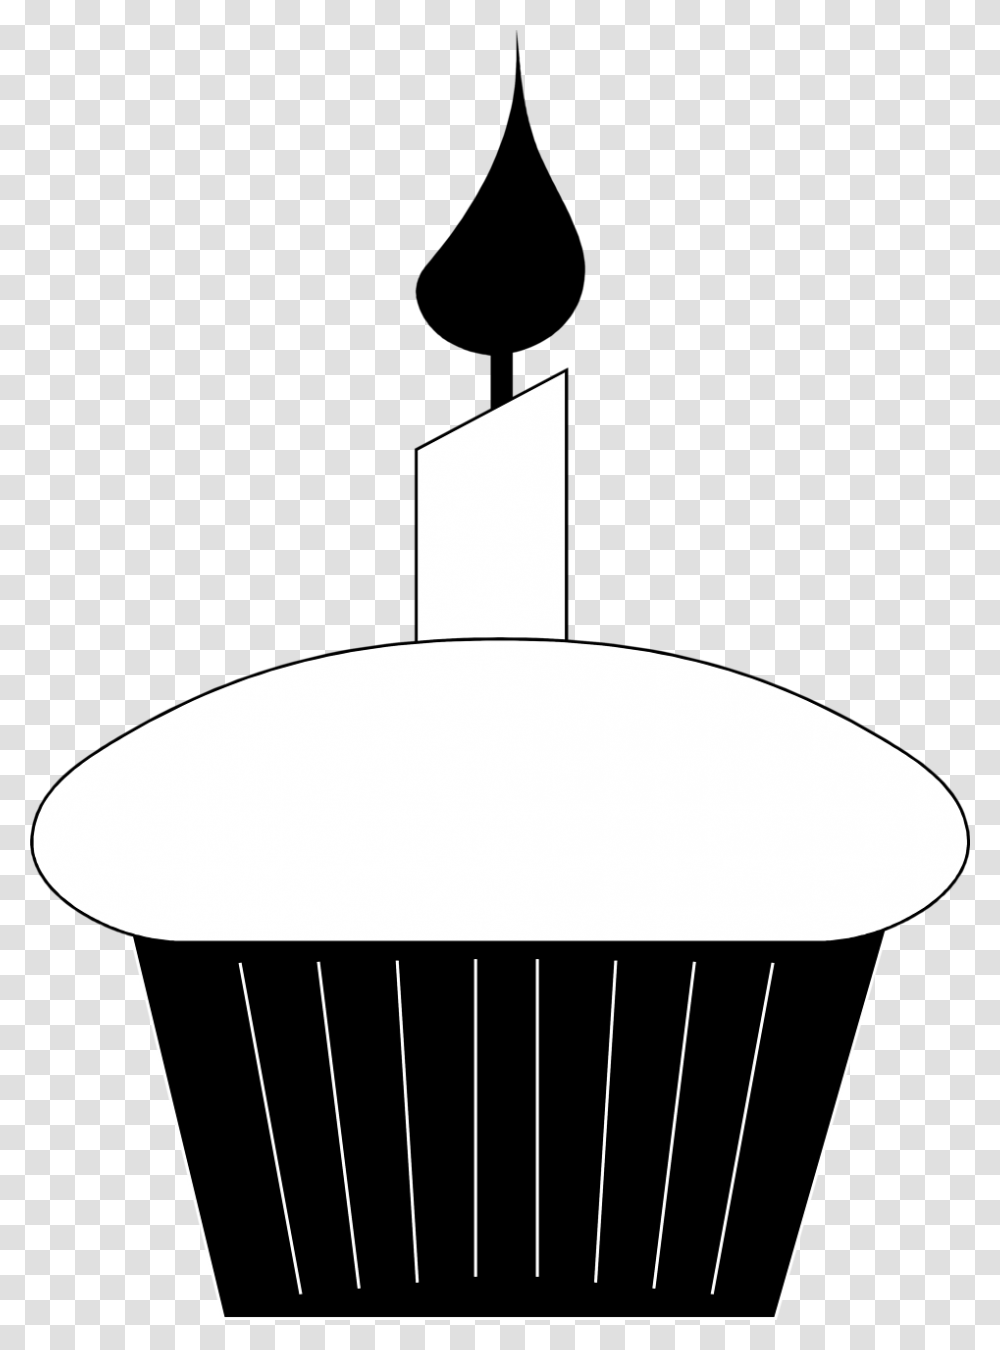 Cupcake Black And White Cute Cupcake Outline Clipart, Lamp, Lighting, Silhouette, Leisure Activities Transparent Png